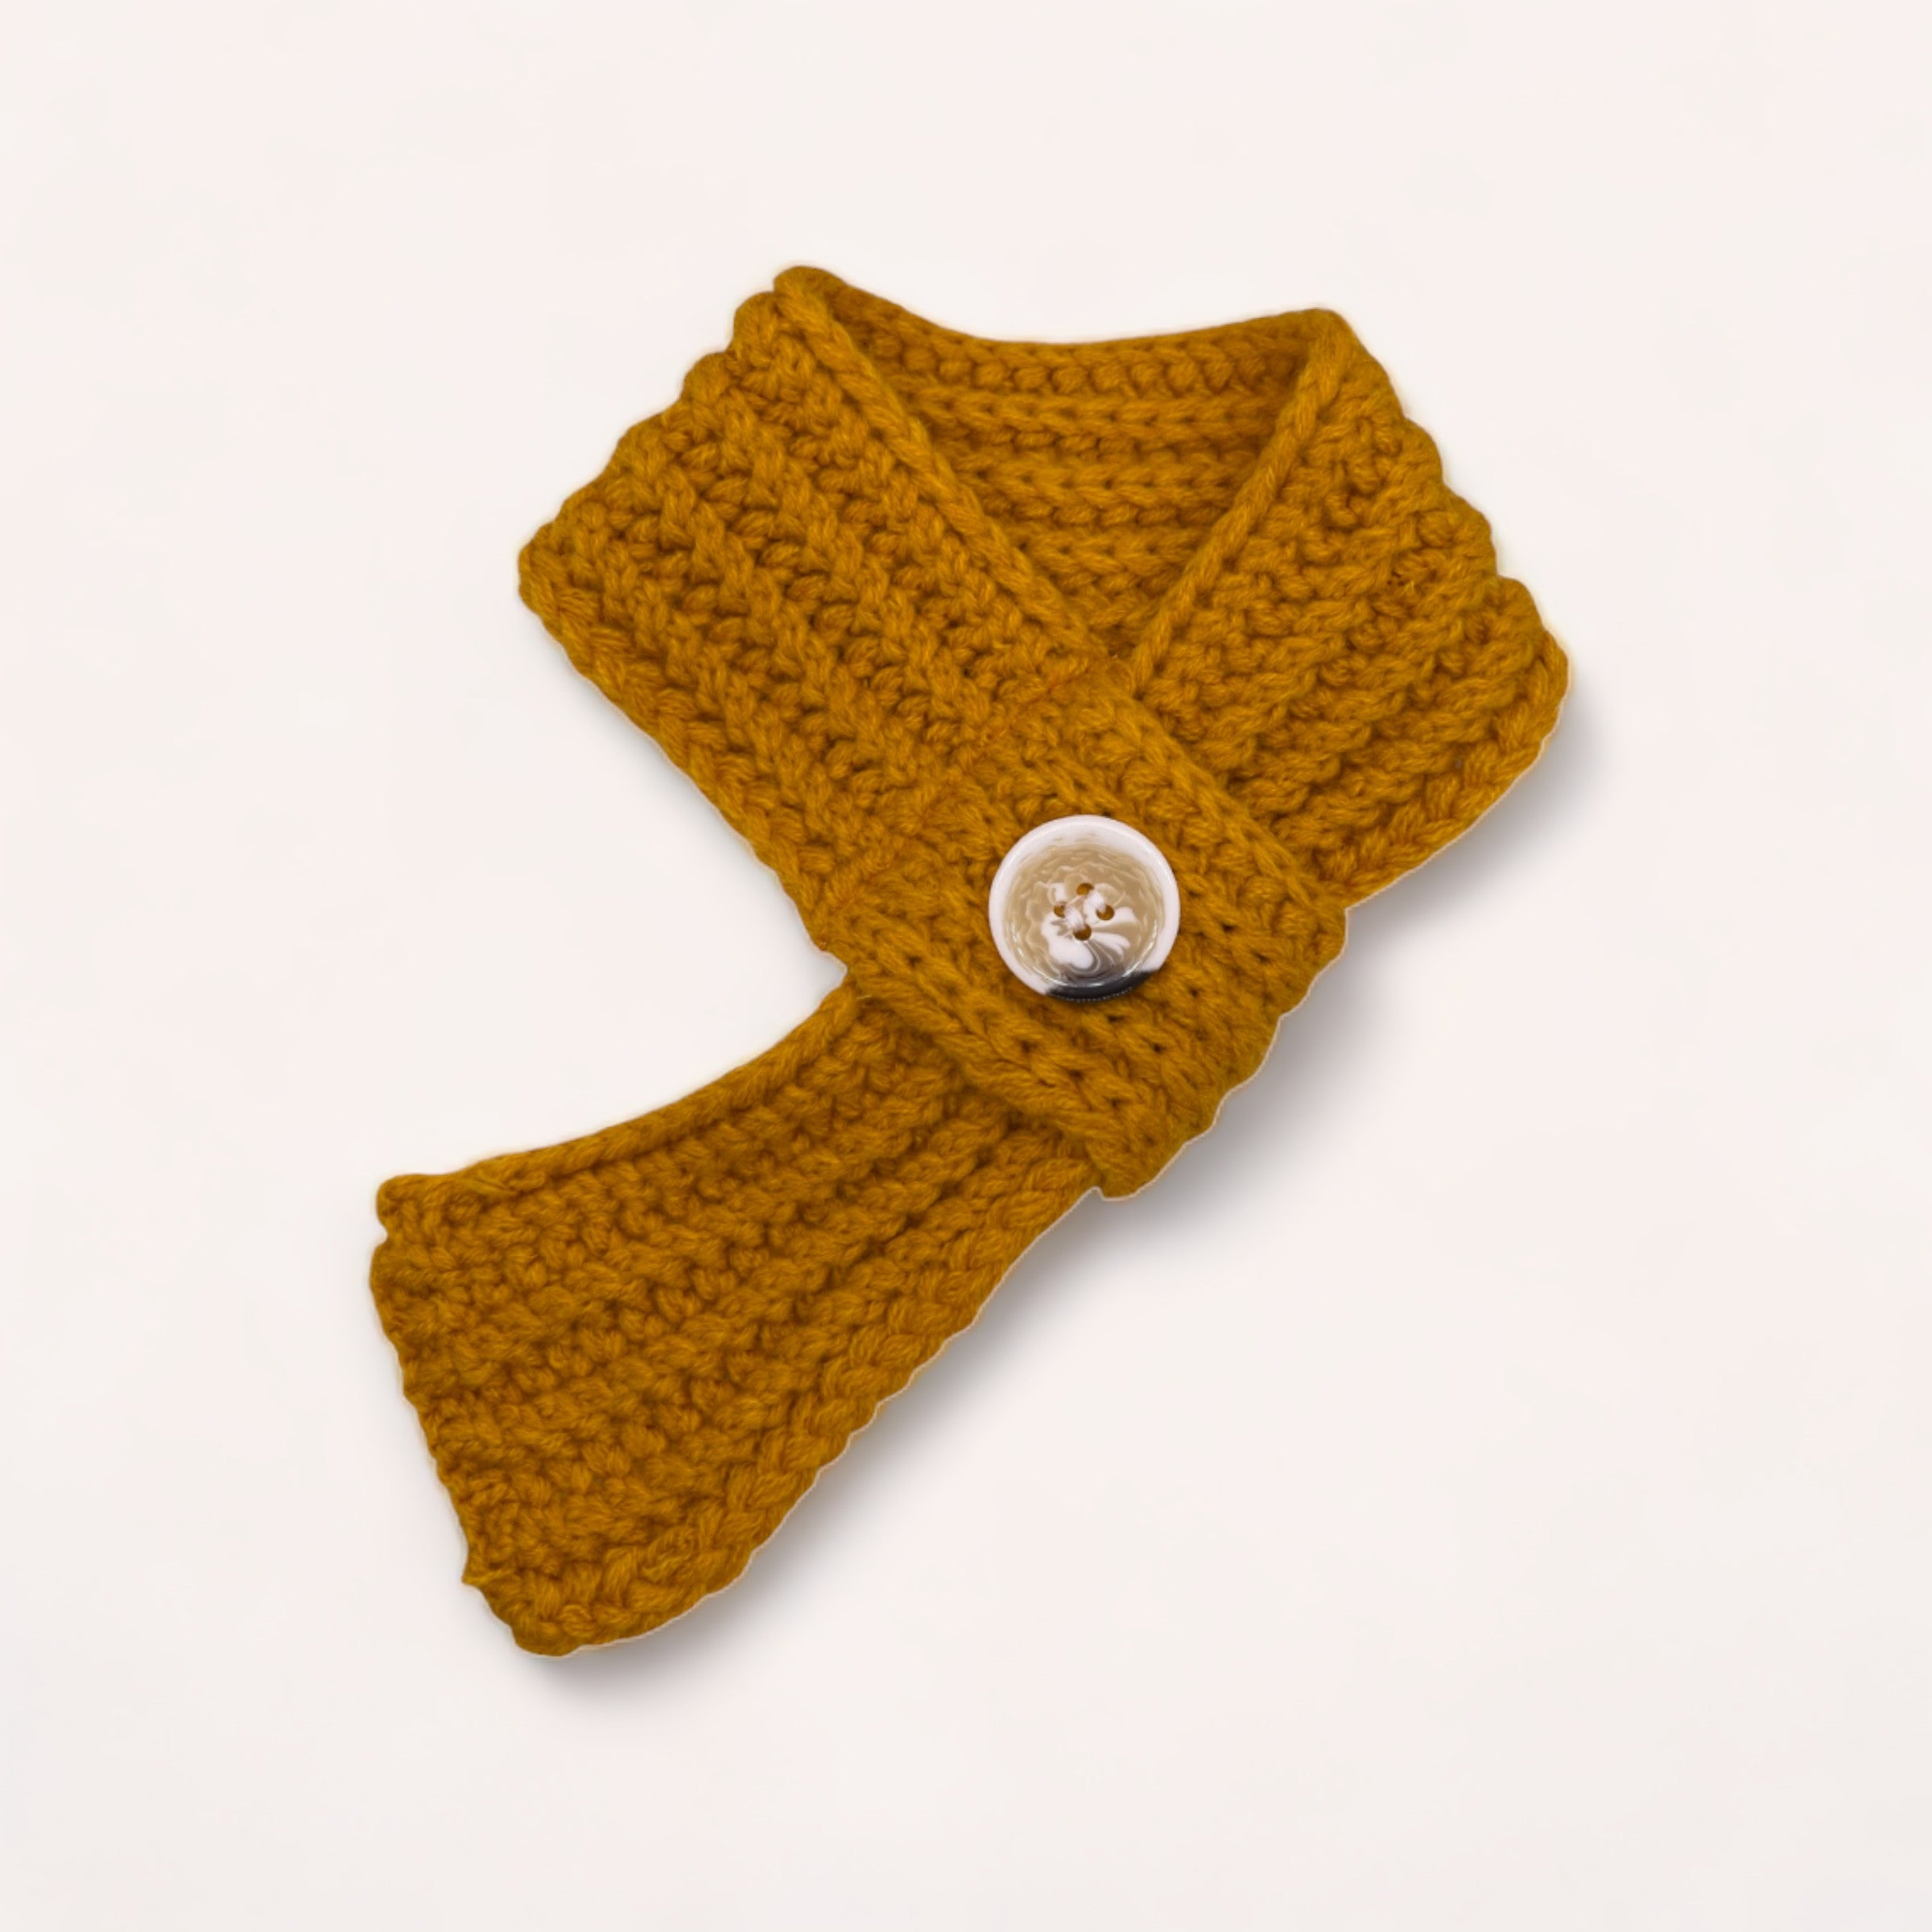 A mustard yellow crochet pet scarf with a button detail, perfect as a winter accessory for your furry friend, displayed on a white background by giftbox co.